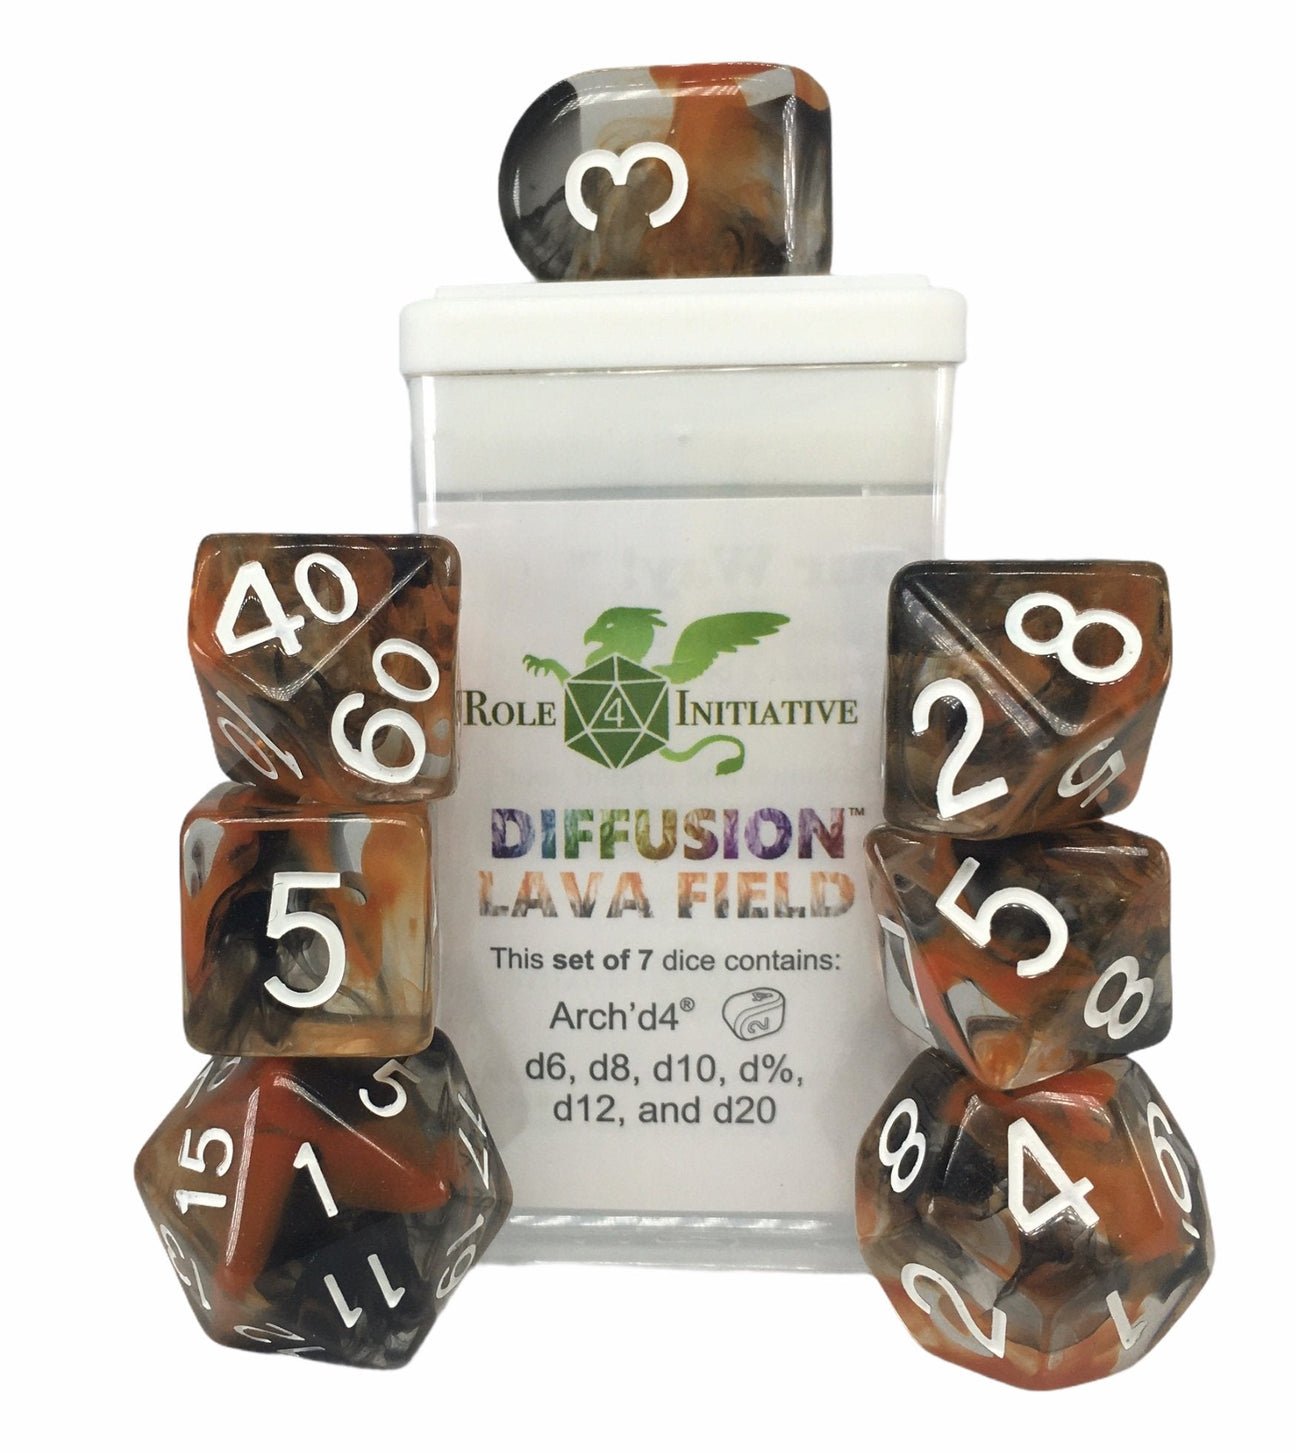 Diffusion Lava Field - 7 dice set (with Arch’d4™) - The Fourth Place